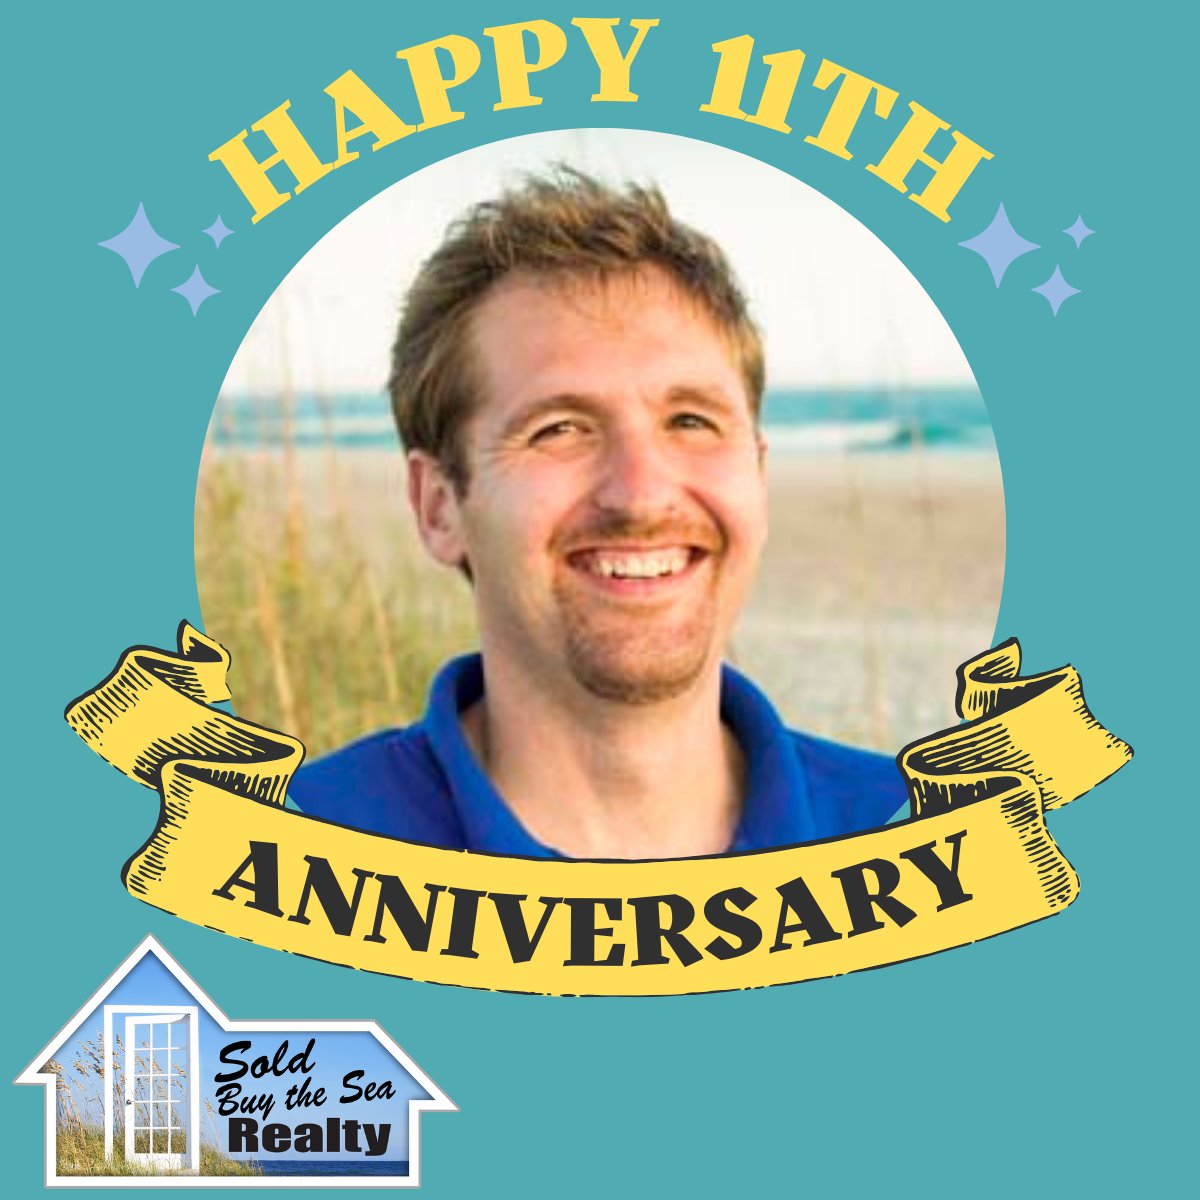 Happy 11th anniversary, Nick! We love having you with our firm 🏠

#coastalncrealestate #soldbuysea #coastalnc #coastalcarolina #coastalncliving #coastalliving #wilmingtonncrealestate #wilmingtonnc #wilmingtonncrealtor #wilmingtonncforsale #newhanovercounty #newhanover